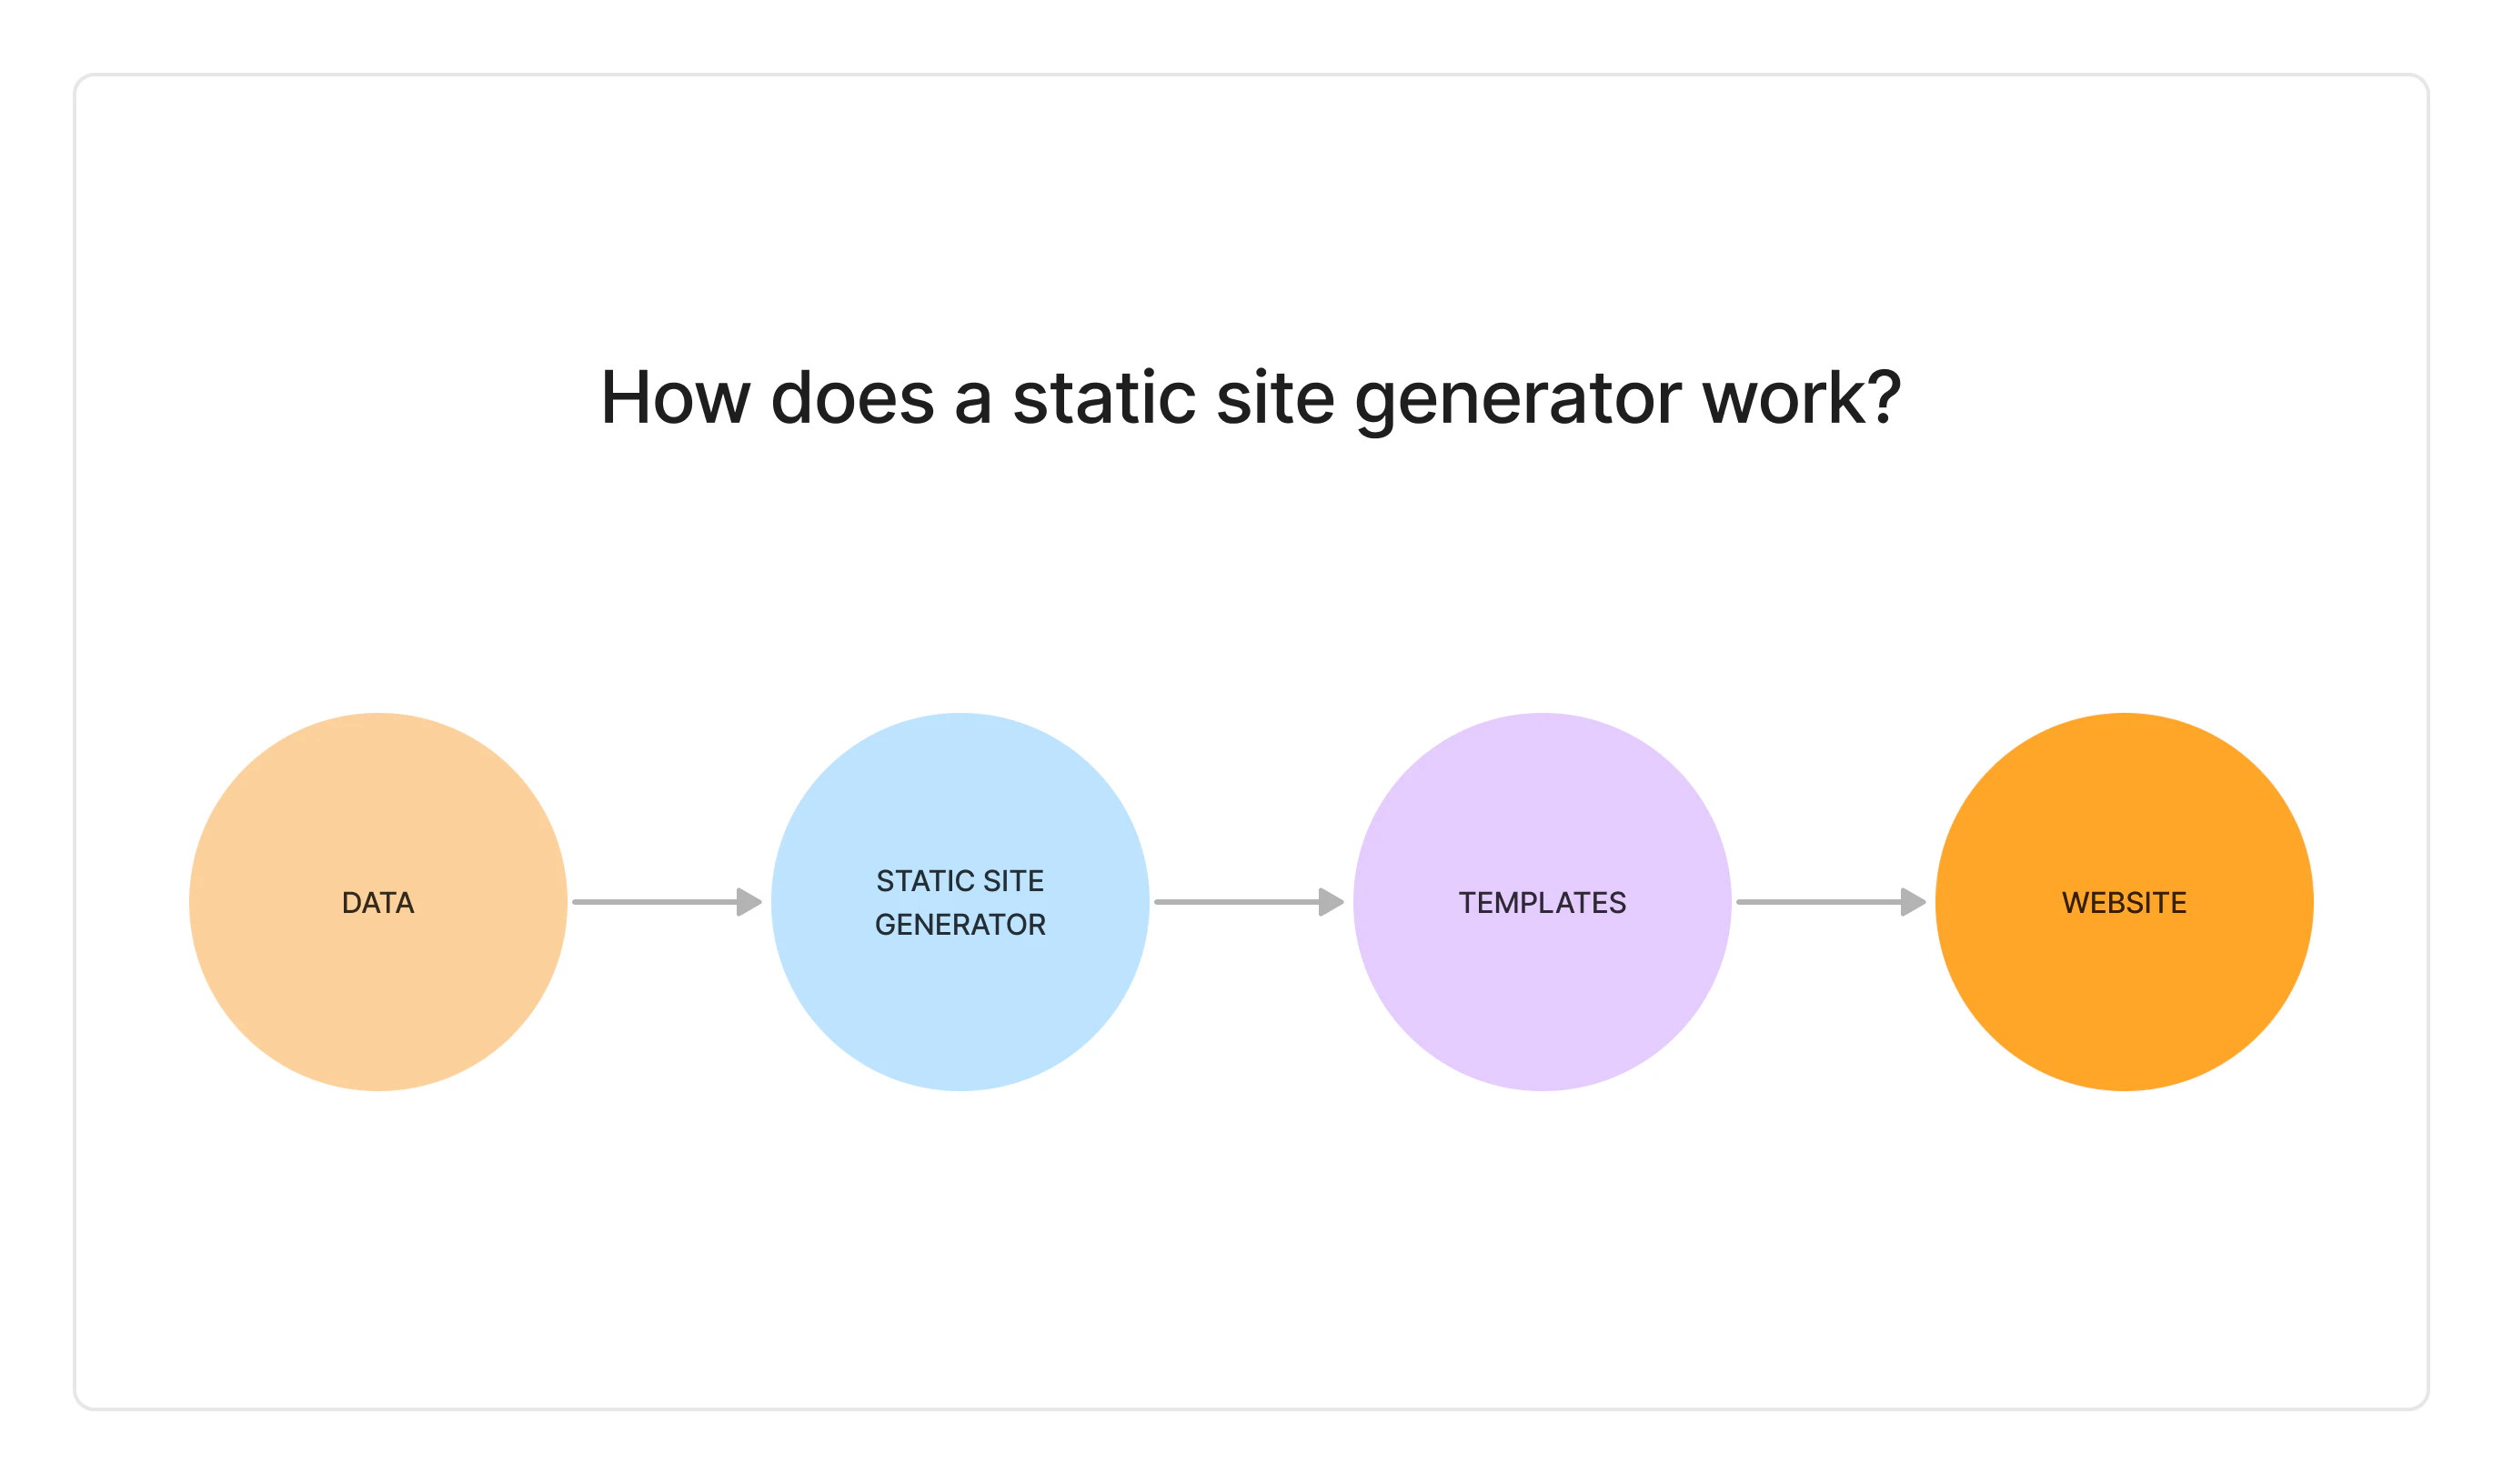 a diagram depicting how a static site work. Data goes to a static site generator that generates a template and then a website.